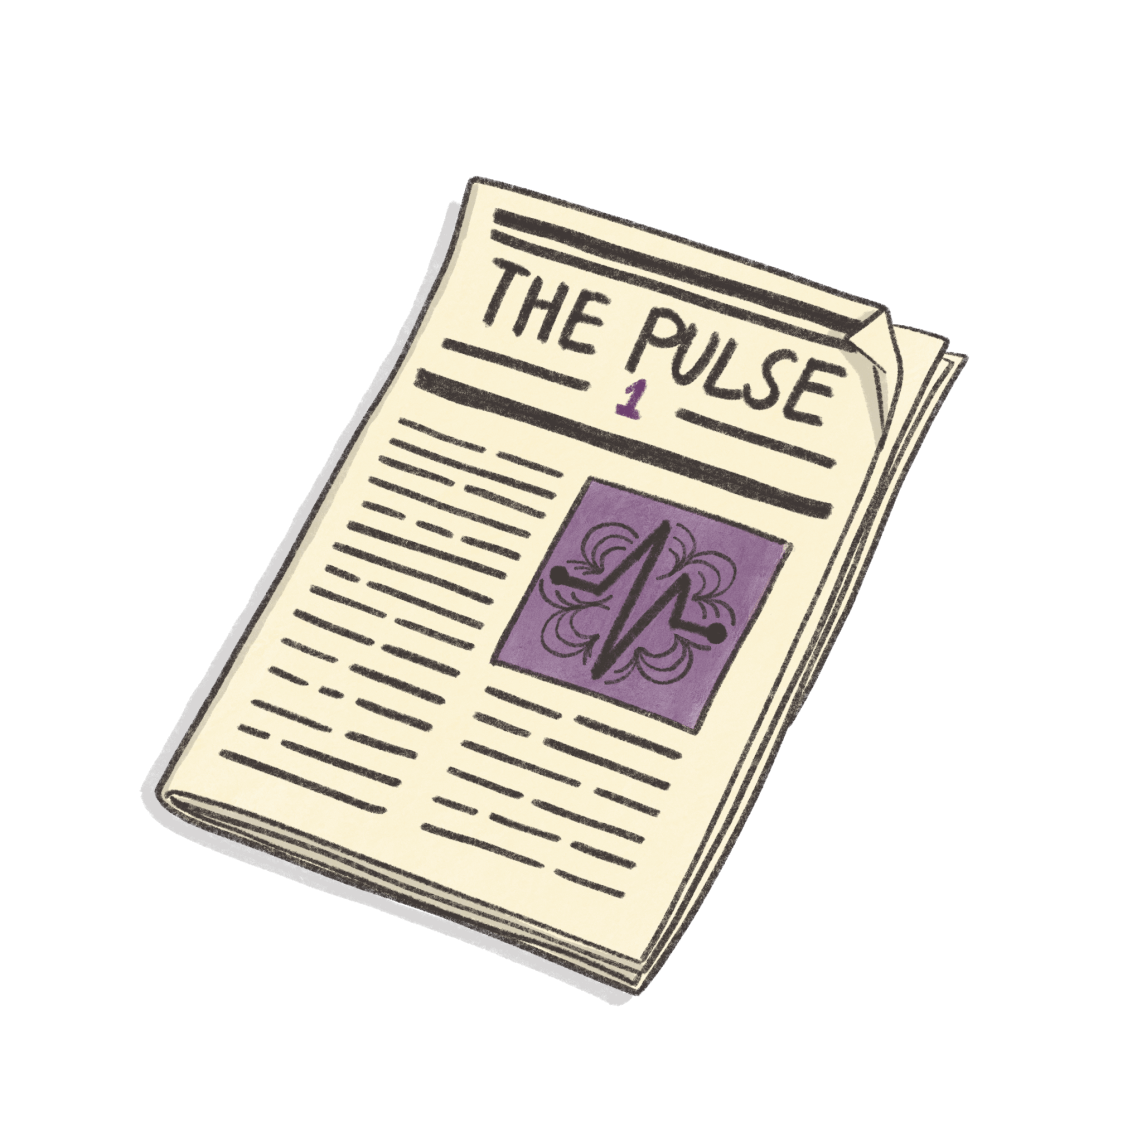 The Apoio Pulse – Issue One